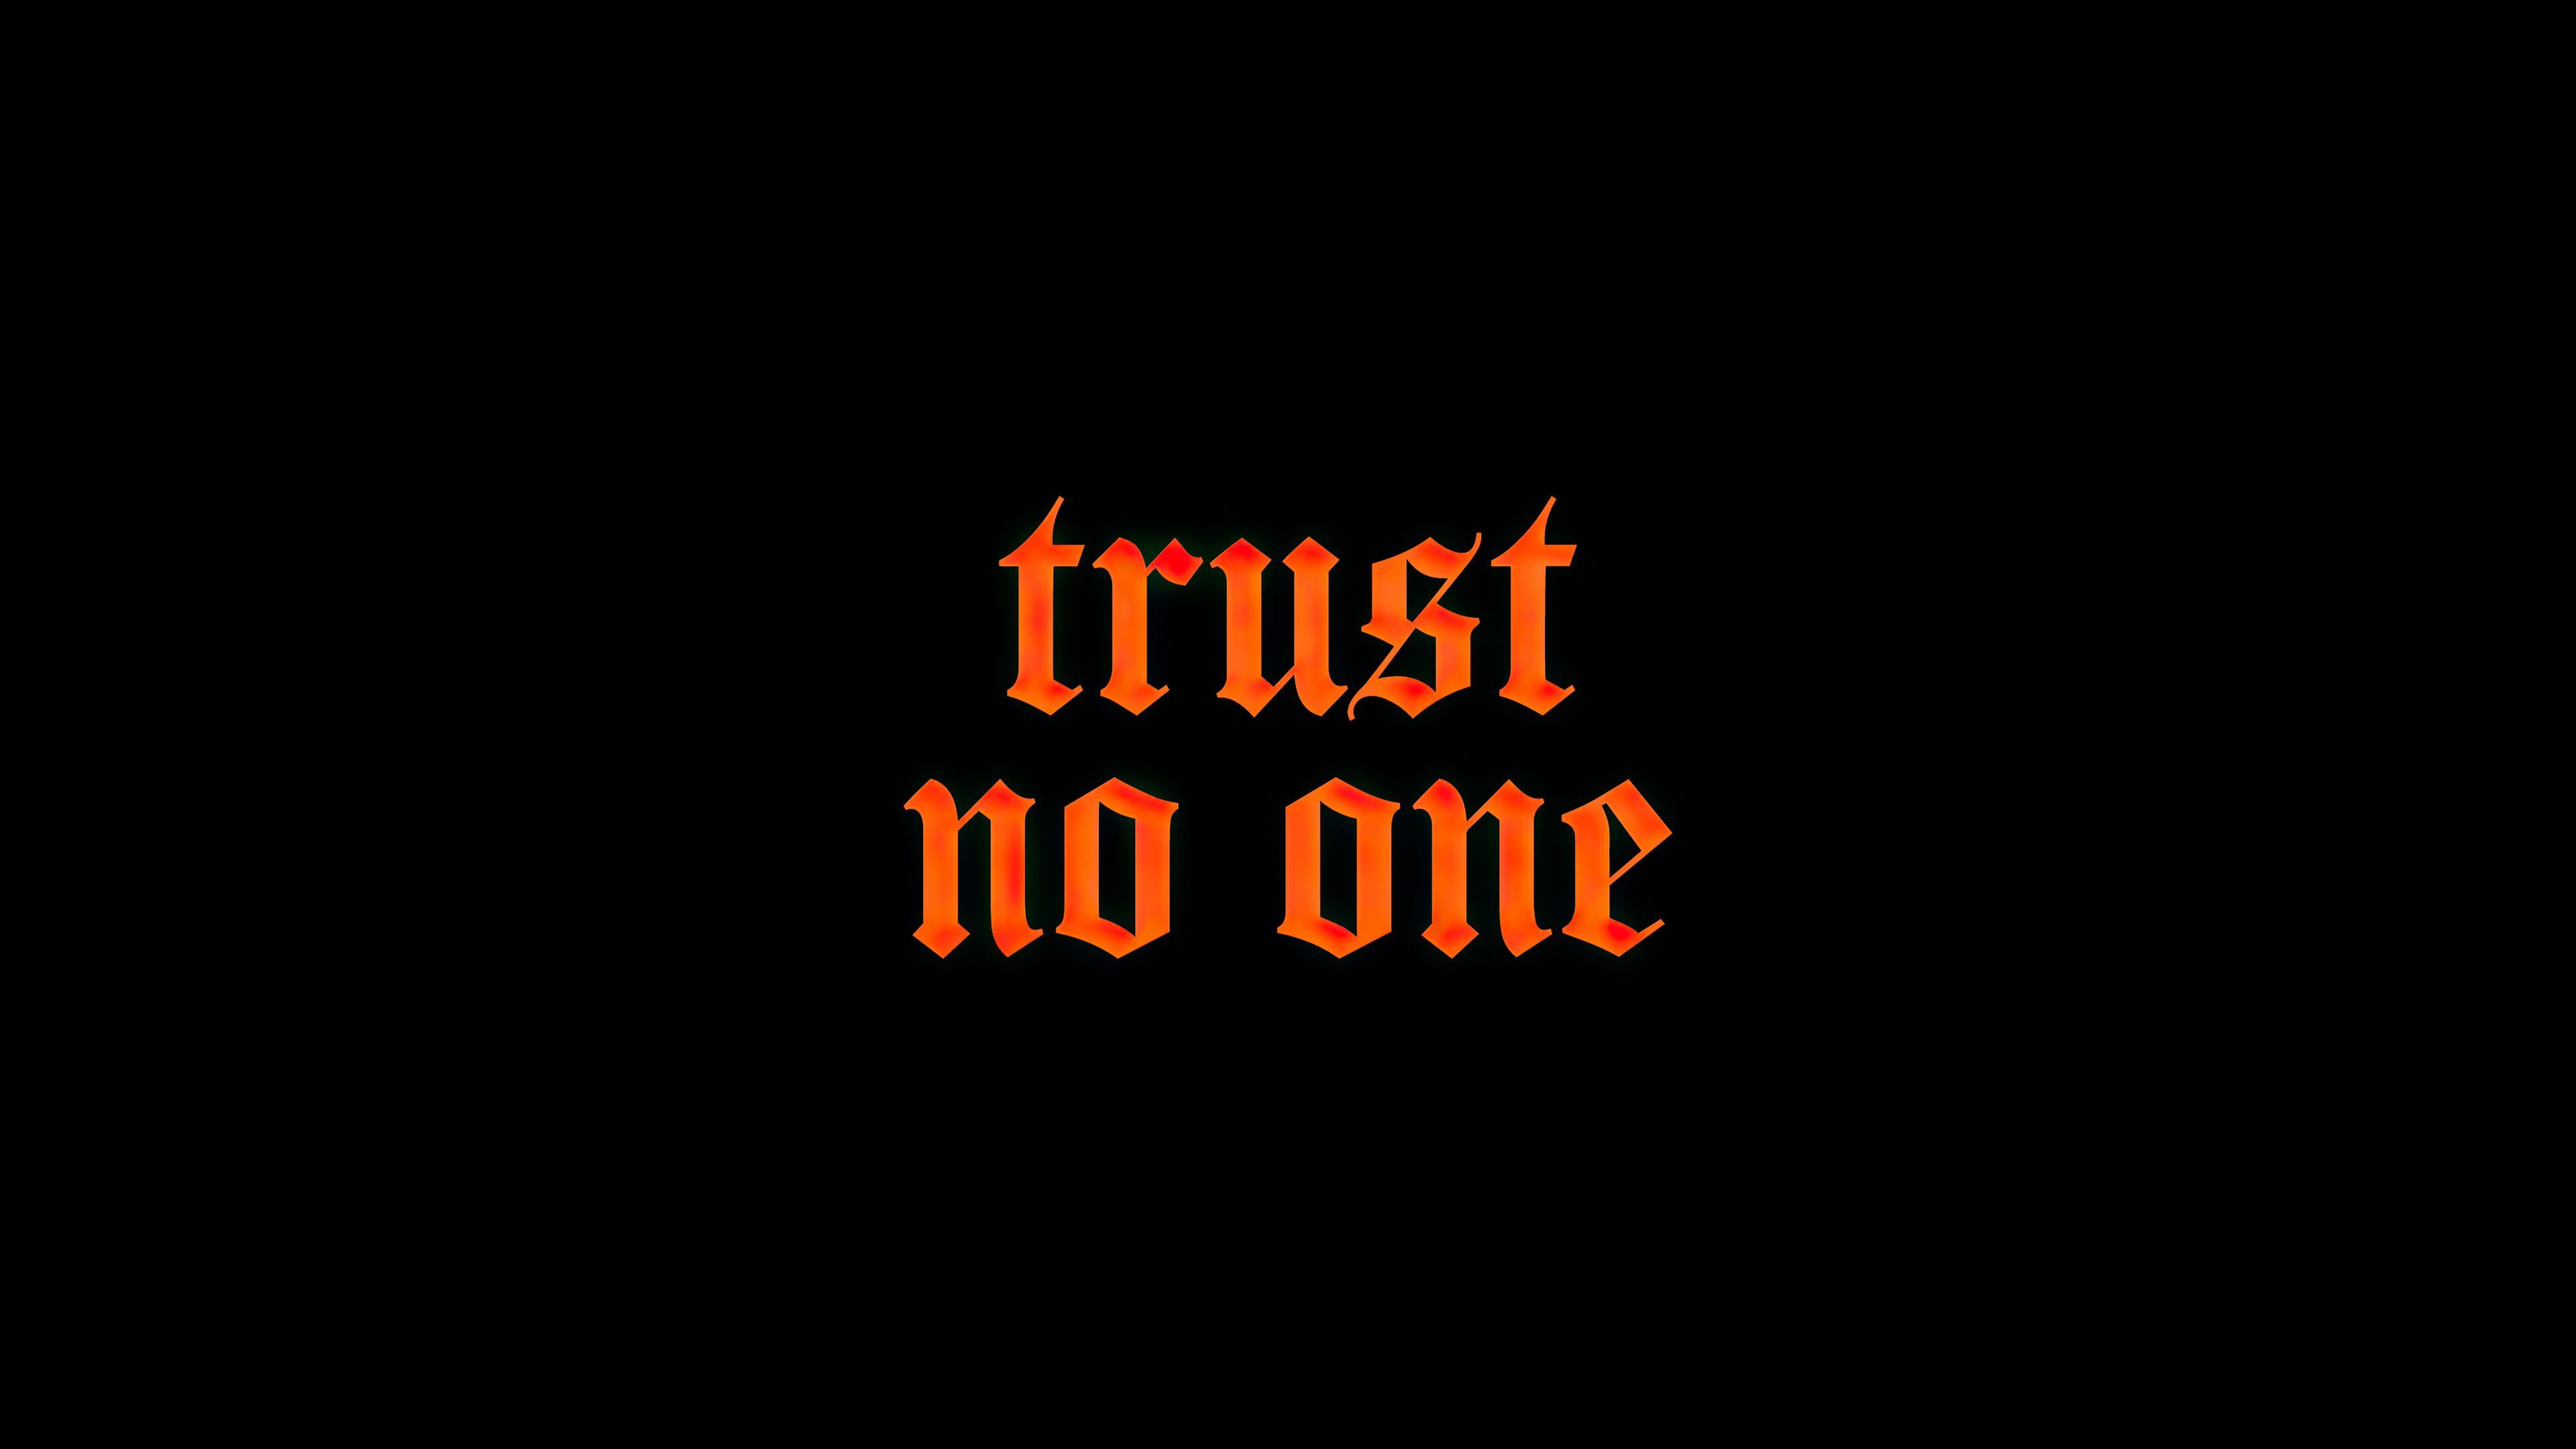 Trust no one hd typography k wallpapers images backgrounds photos and pictures